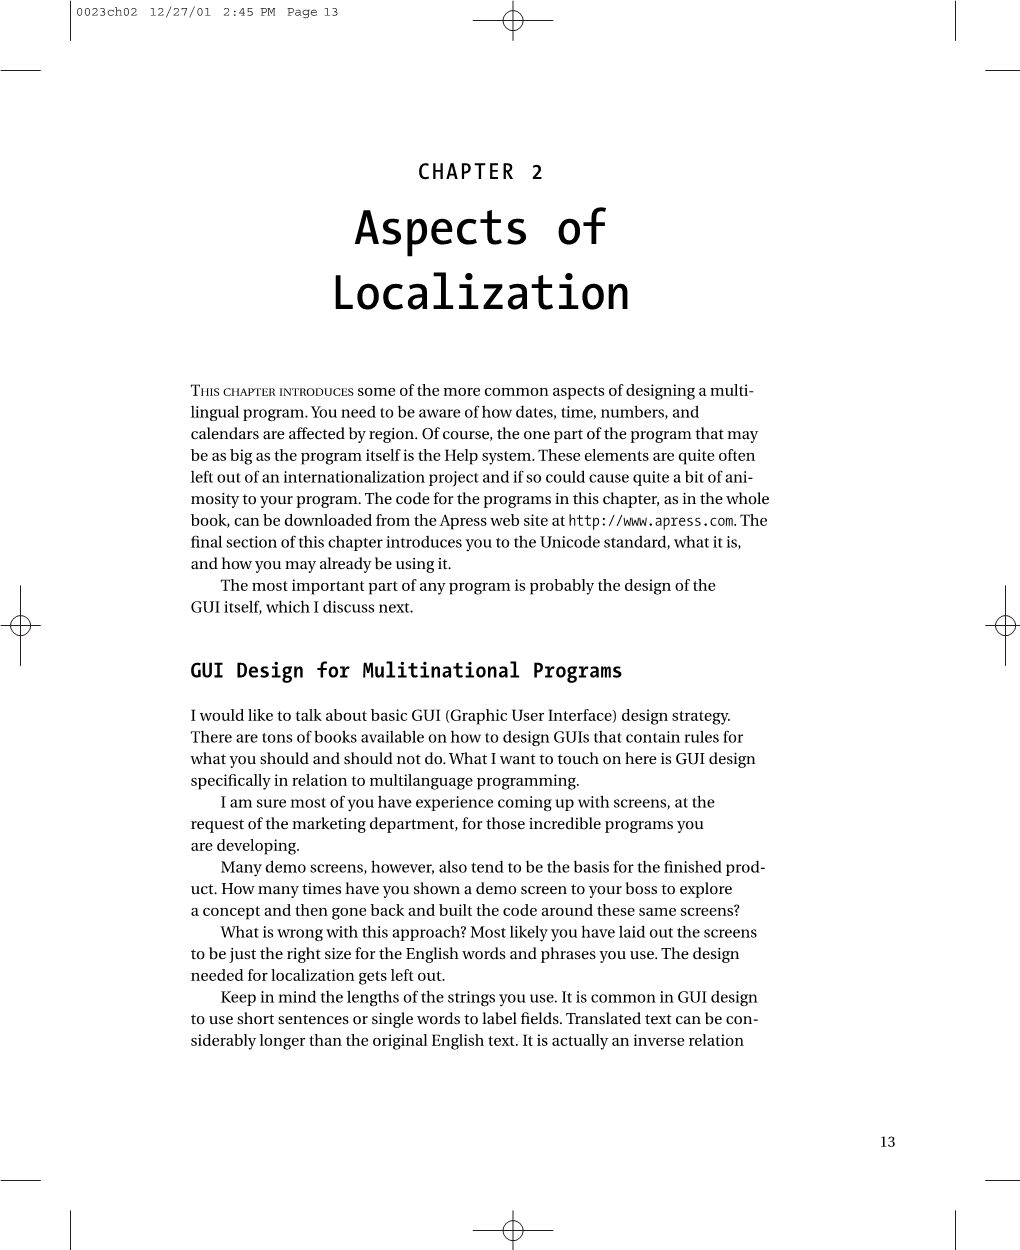 Aspects of Localization